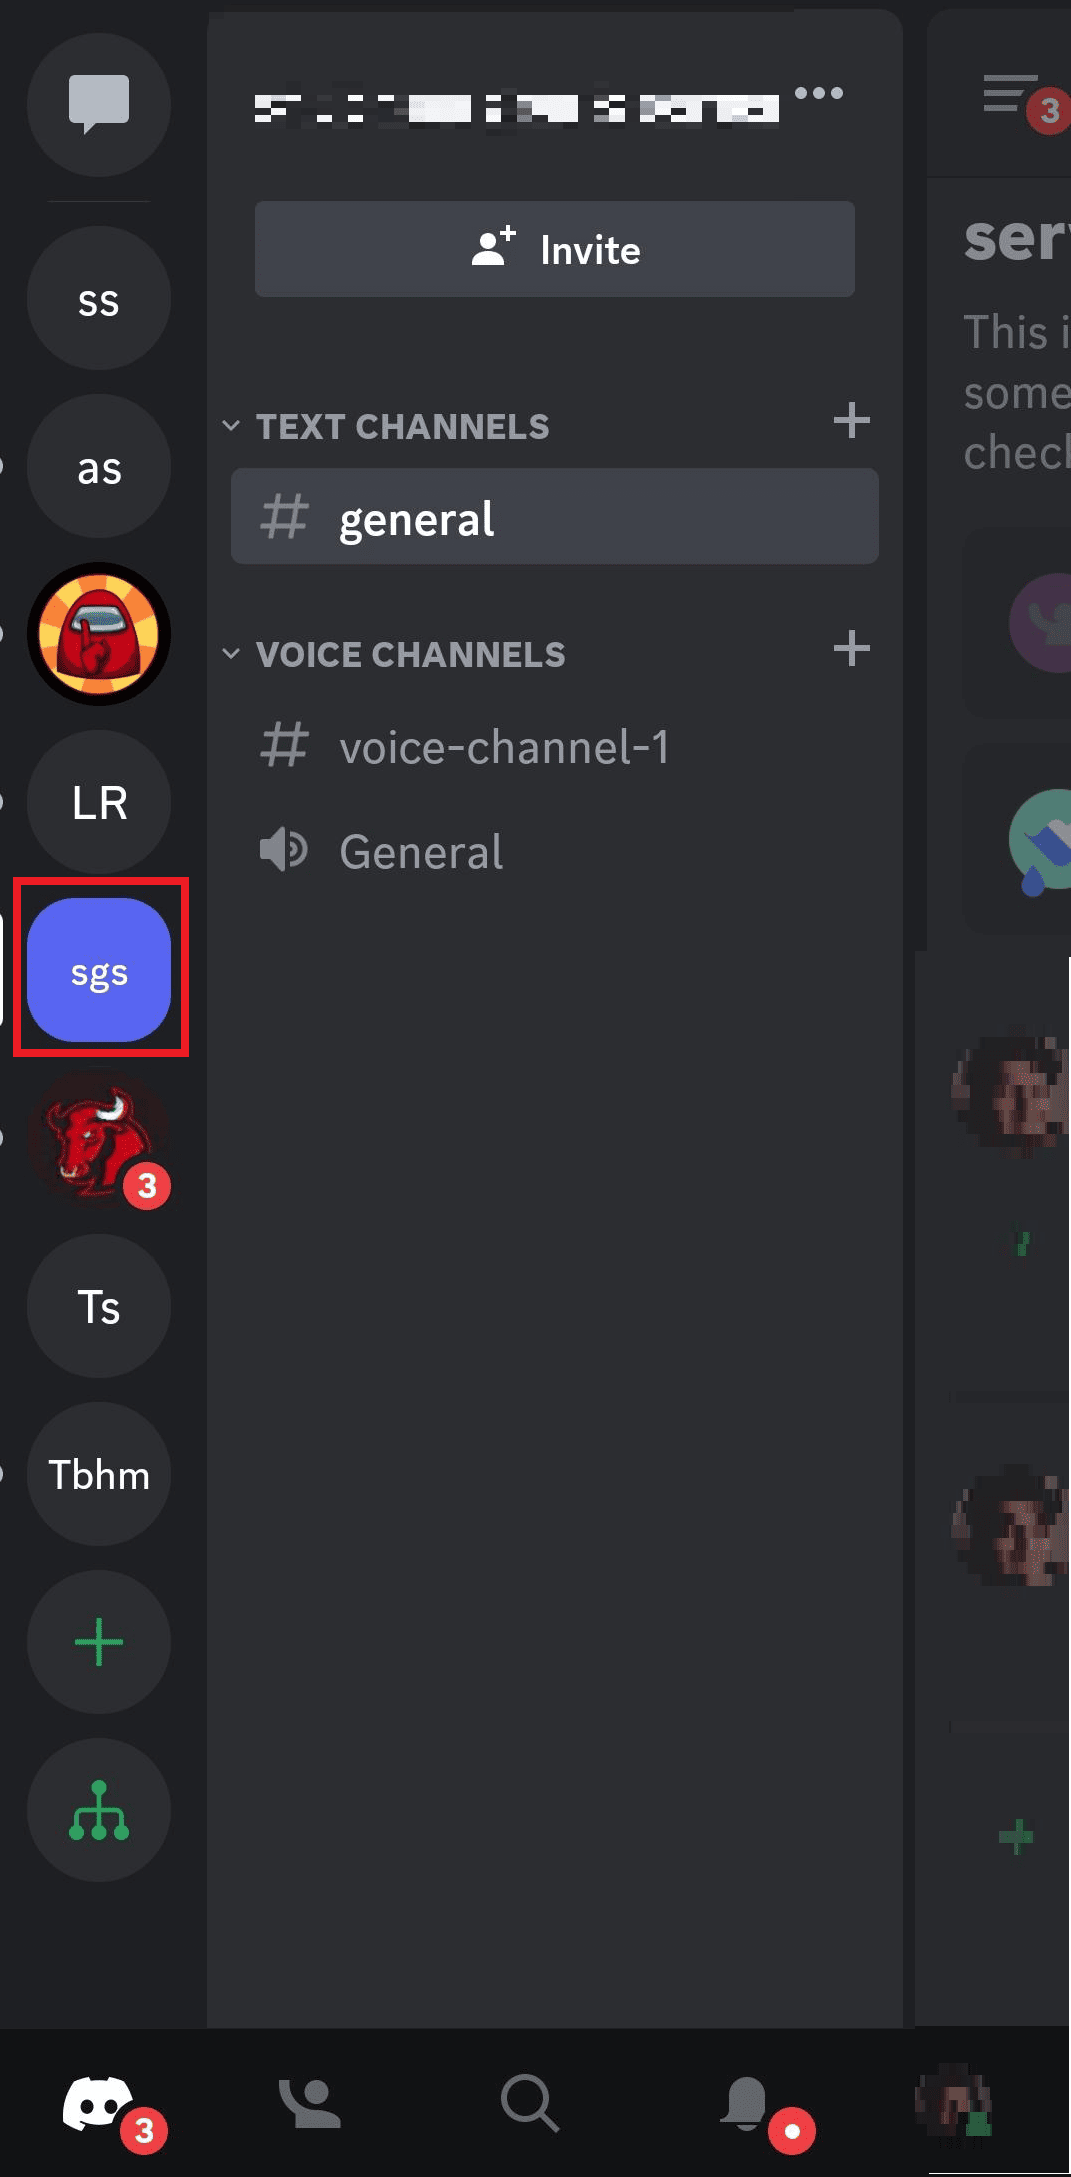 Select the server that hosts the channel 